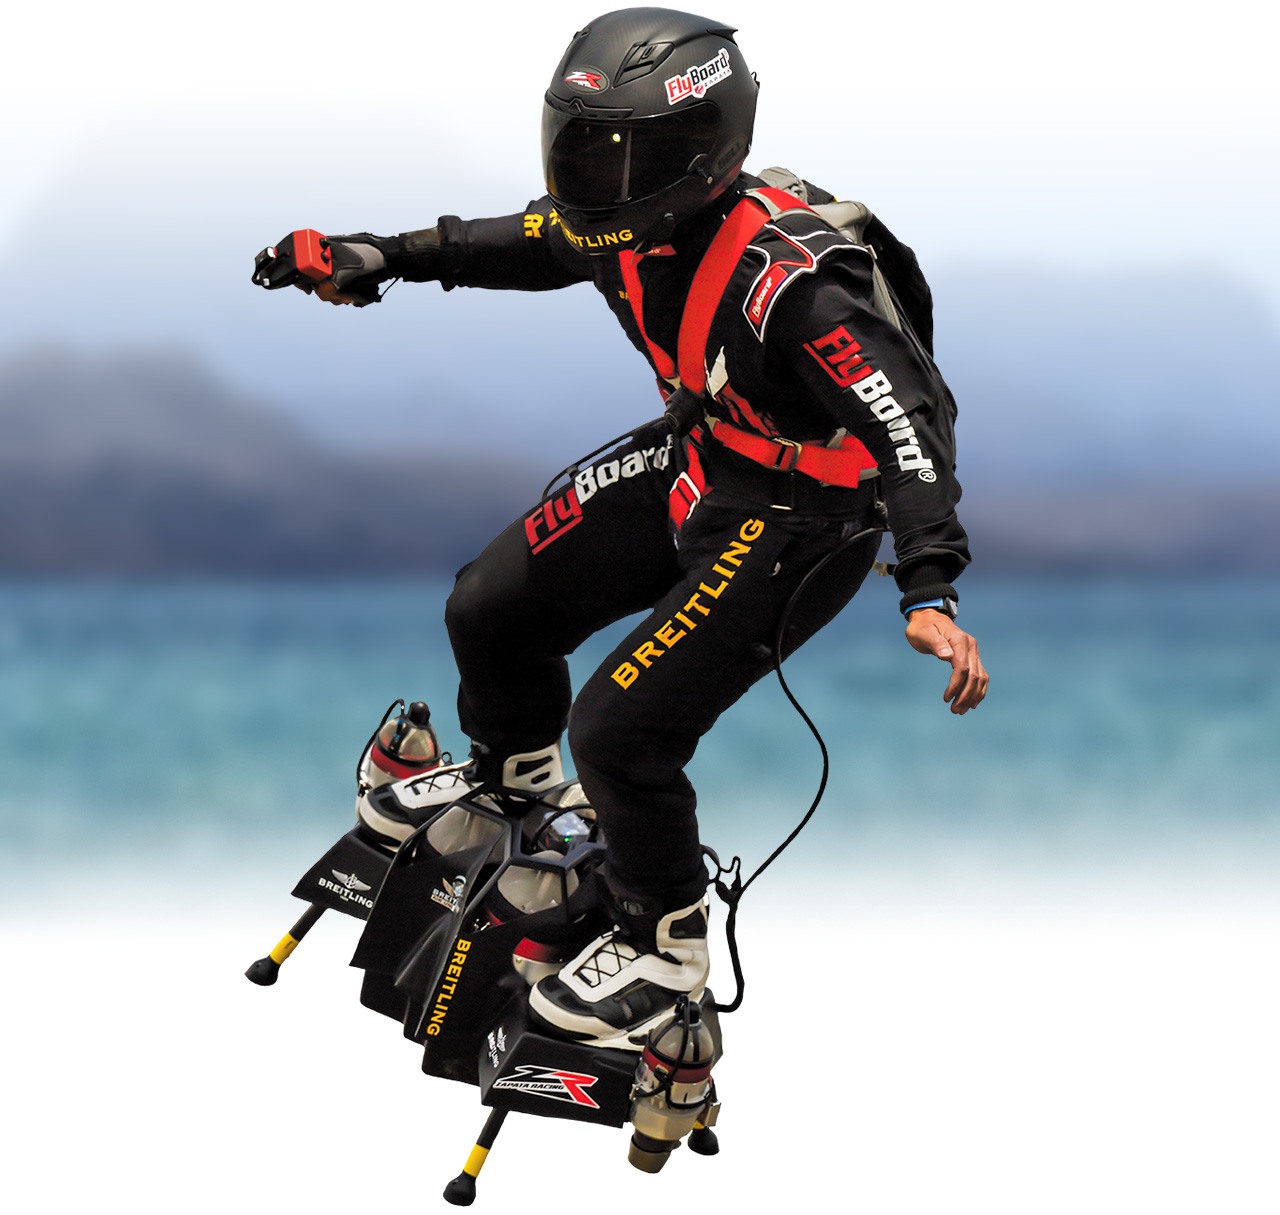 Flyboard Air – is this thing legal?